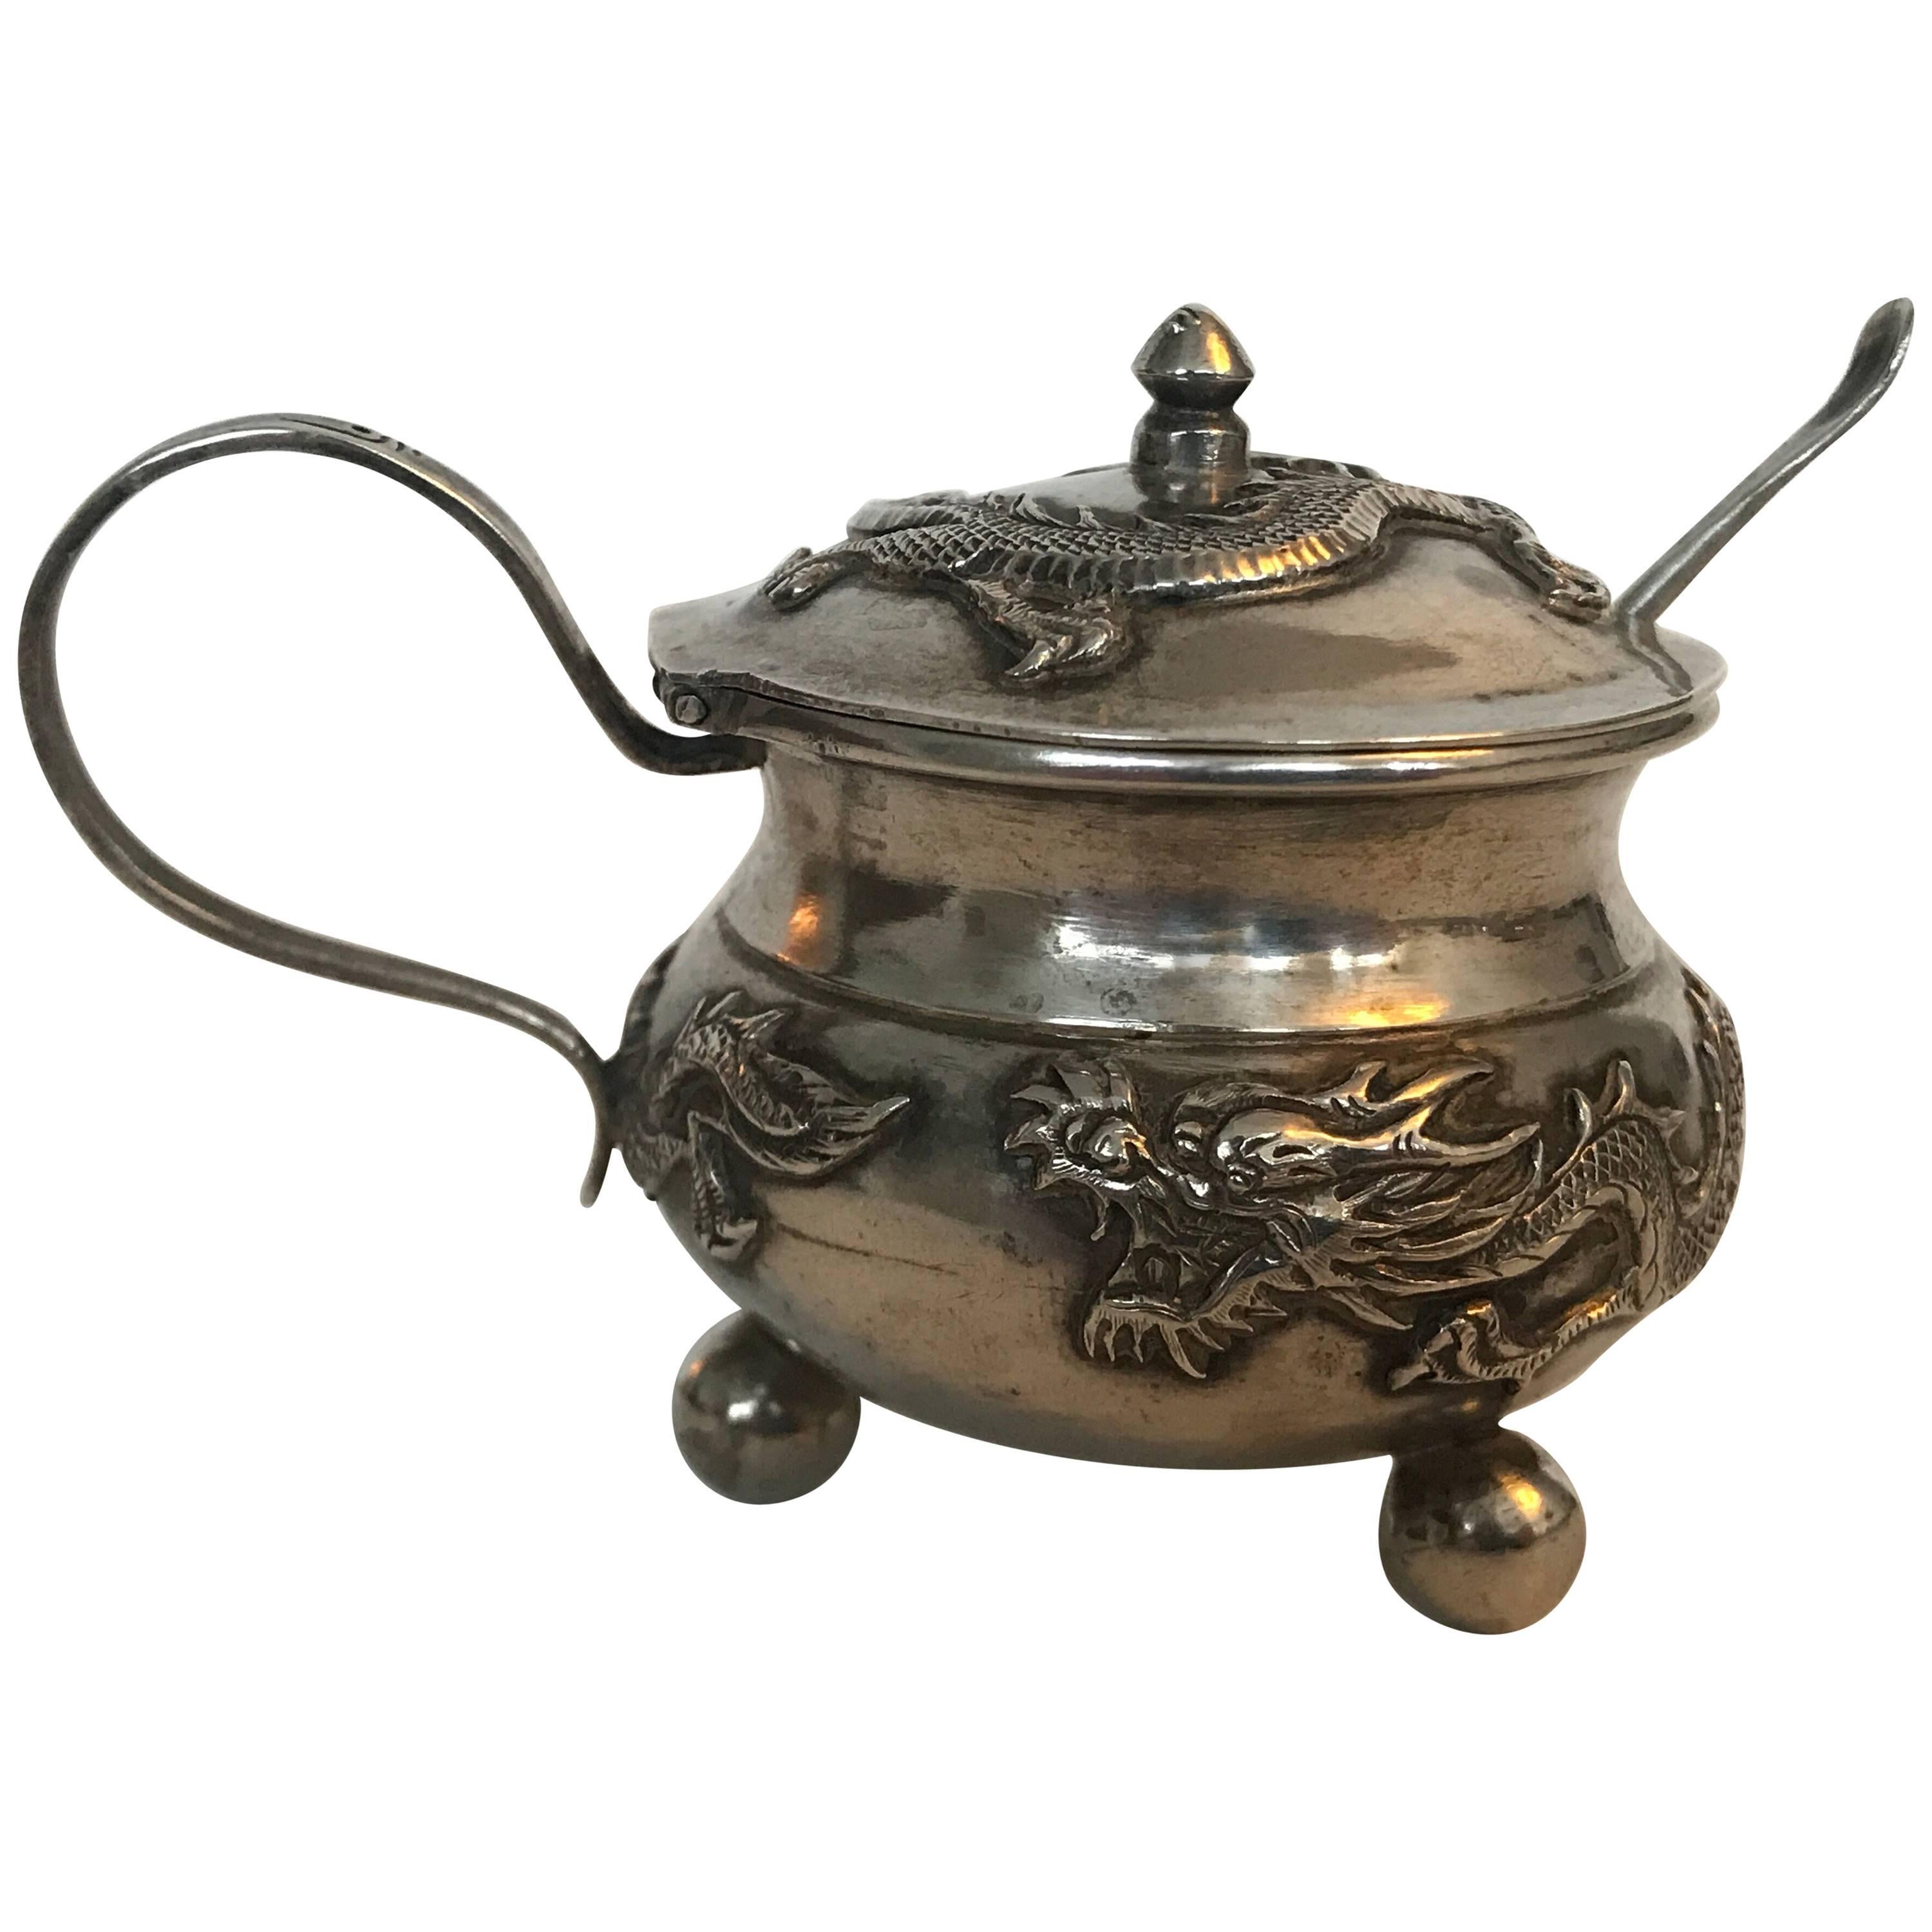 Wang Hing Chinese Export Silver Dragon Mustard Pot with Spoon Early 20th Century For Sale